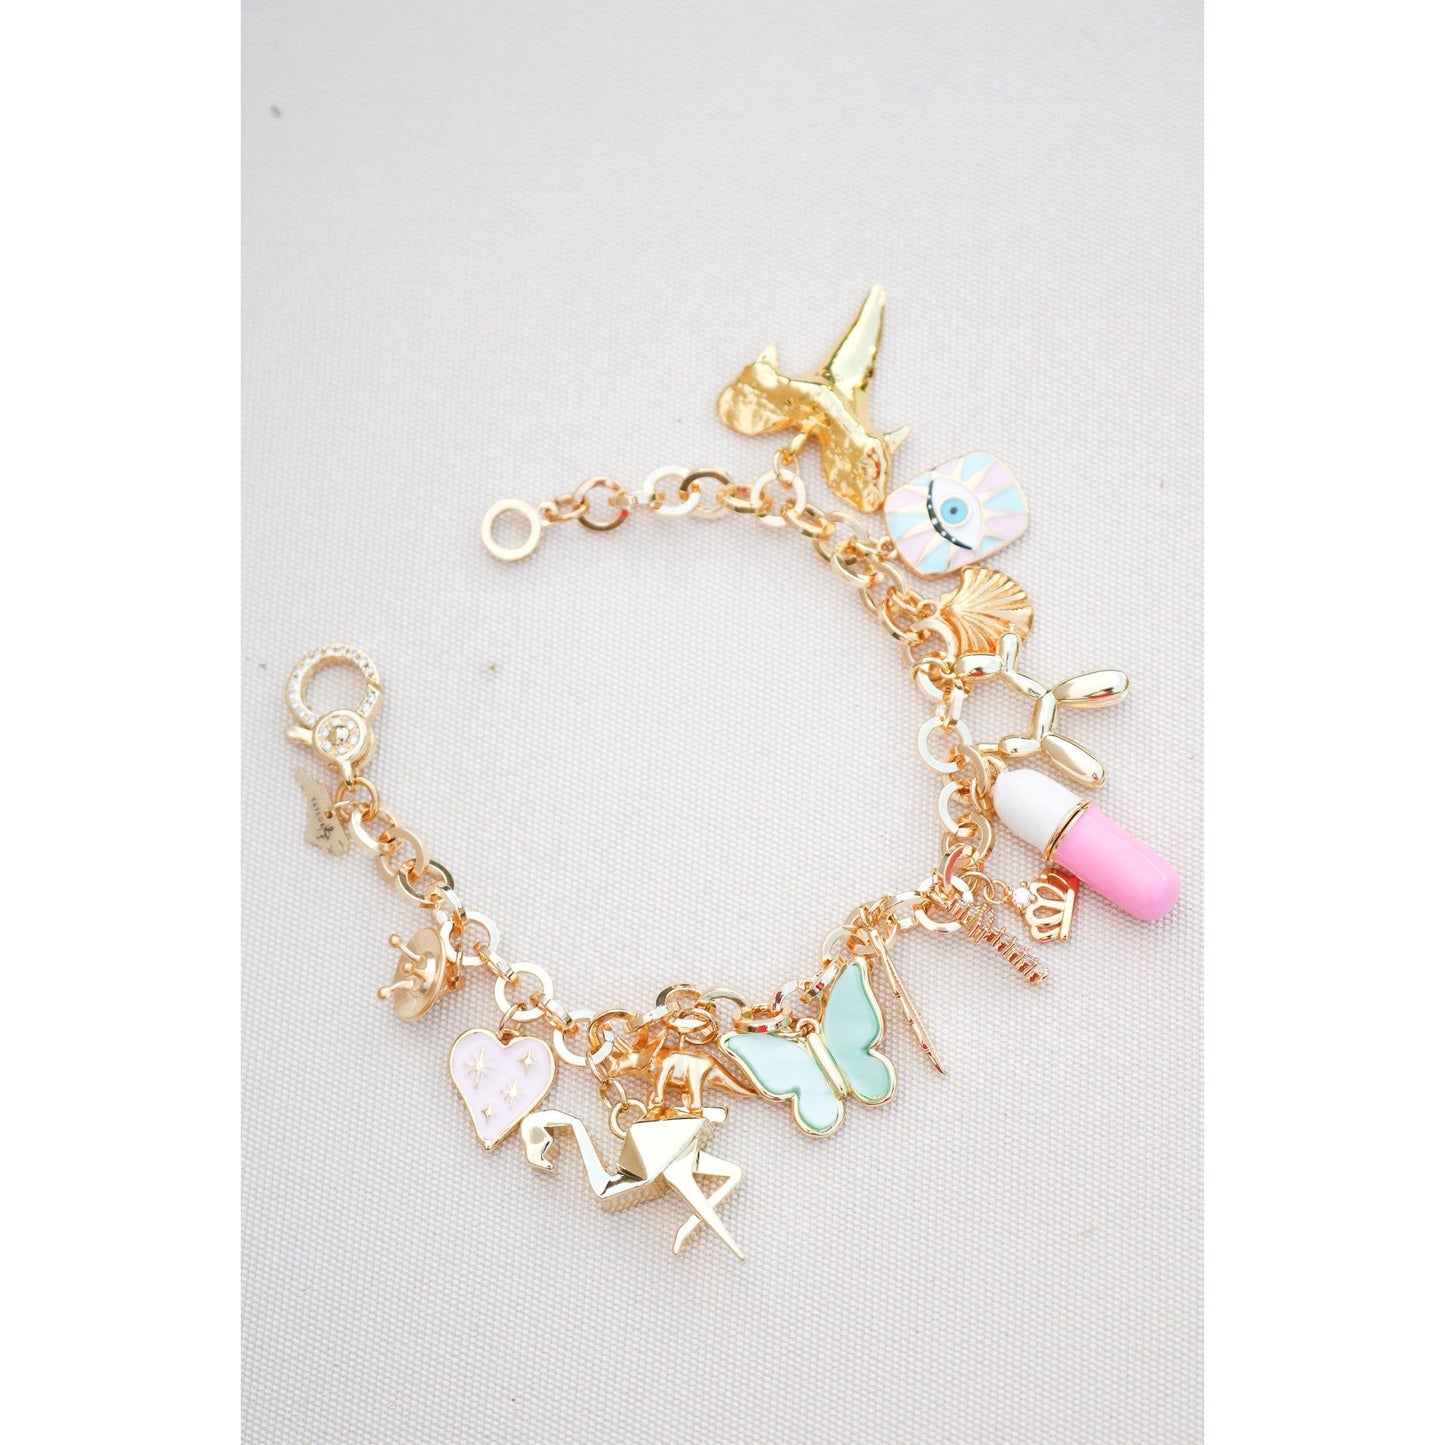 Buy CUTE CHARMS BRACELET at Amazon.in